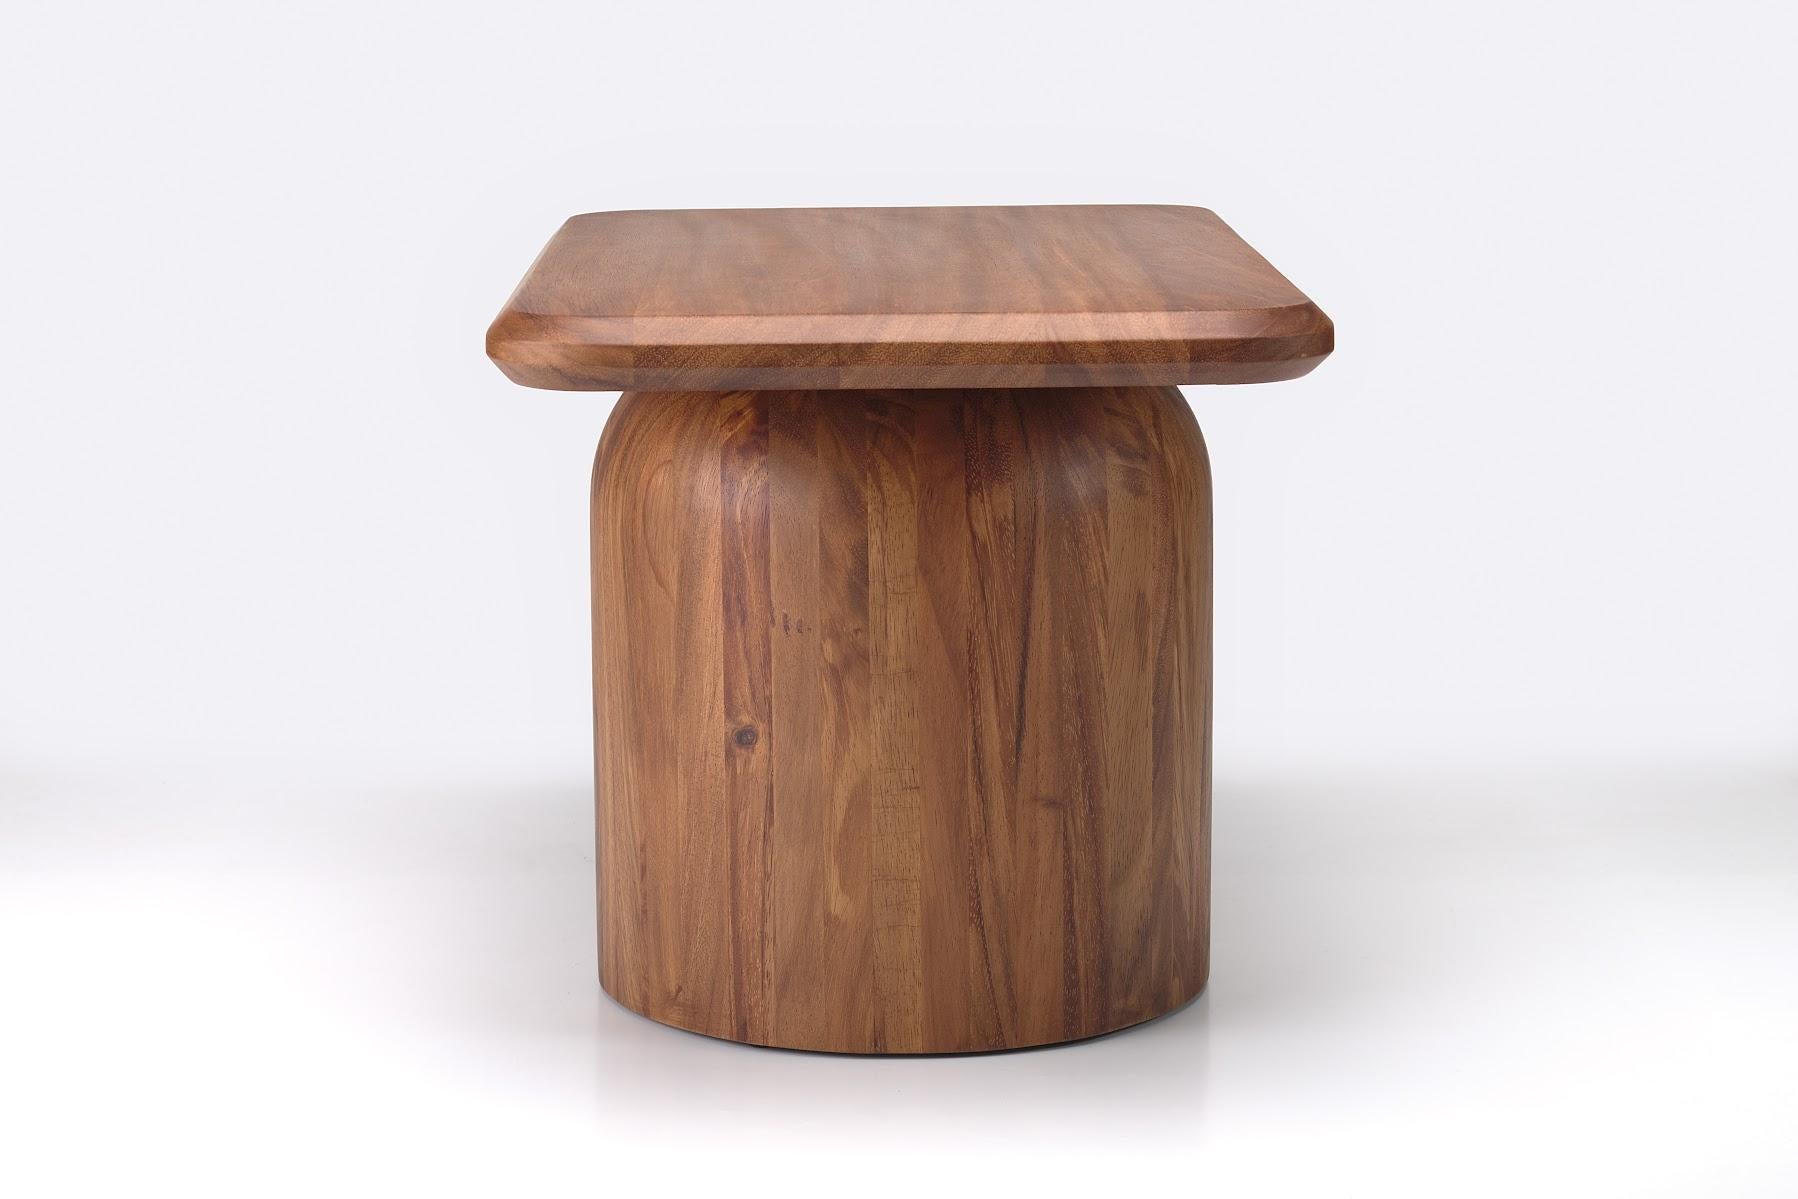 Conacaste wood Hollow center for weight in base and solid wood top.

Part of Labrica's Arco collection was inspired by Spanish Colonial Architecture found in Antigua Guatemala.

We played with architectural elements such as arches and cupolas to